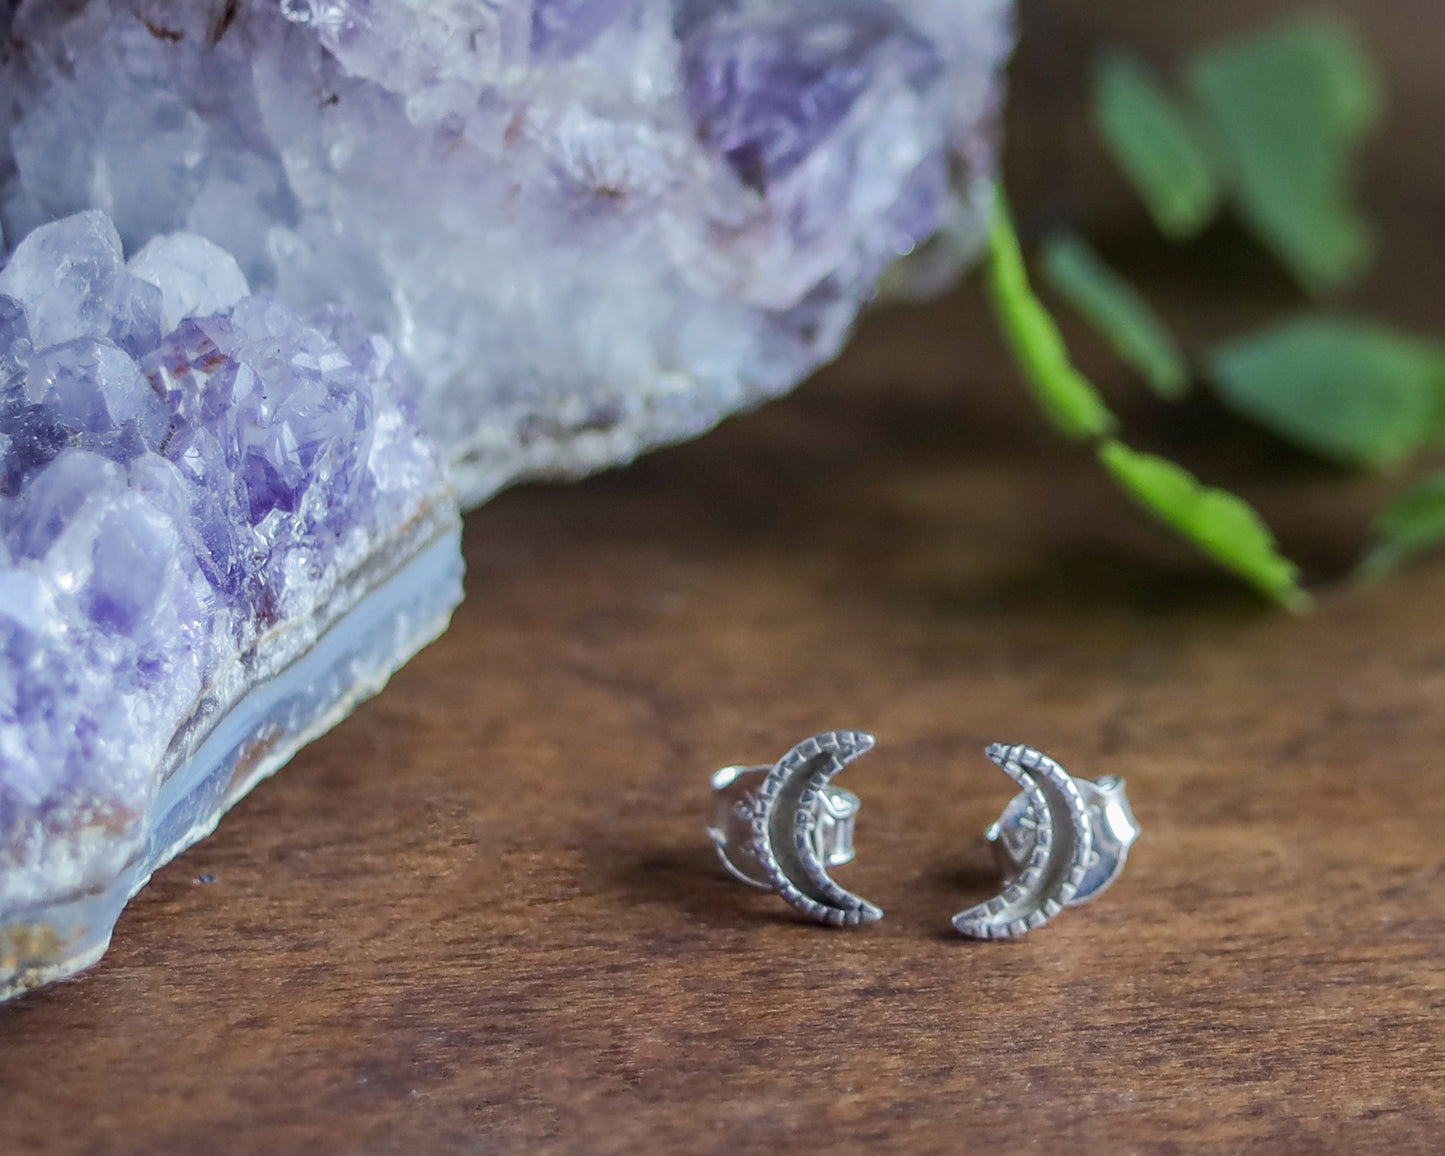 Crescent Moon Stud Earrings | Celestial Witchy Boho Whimsical Minimalist | Brass & Silver Gold Tiny Dainty Posts | Half Moon Lunar Phase